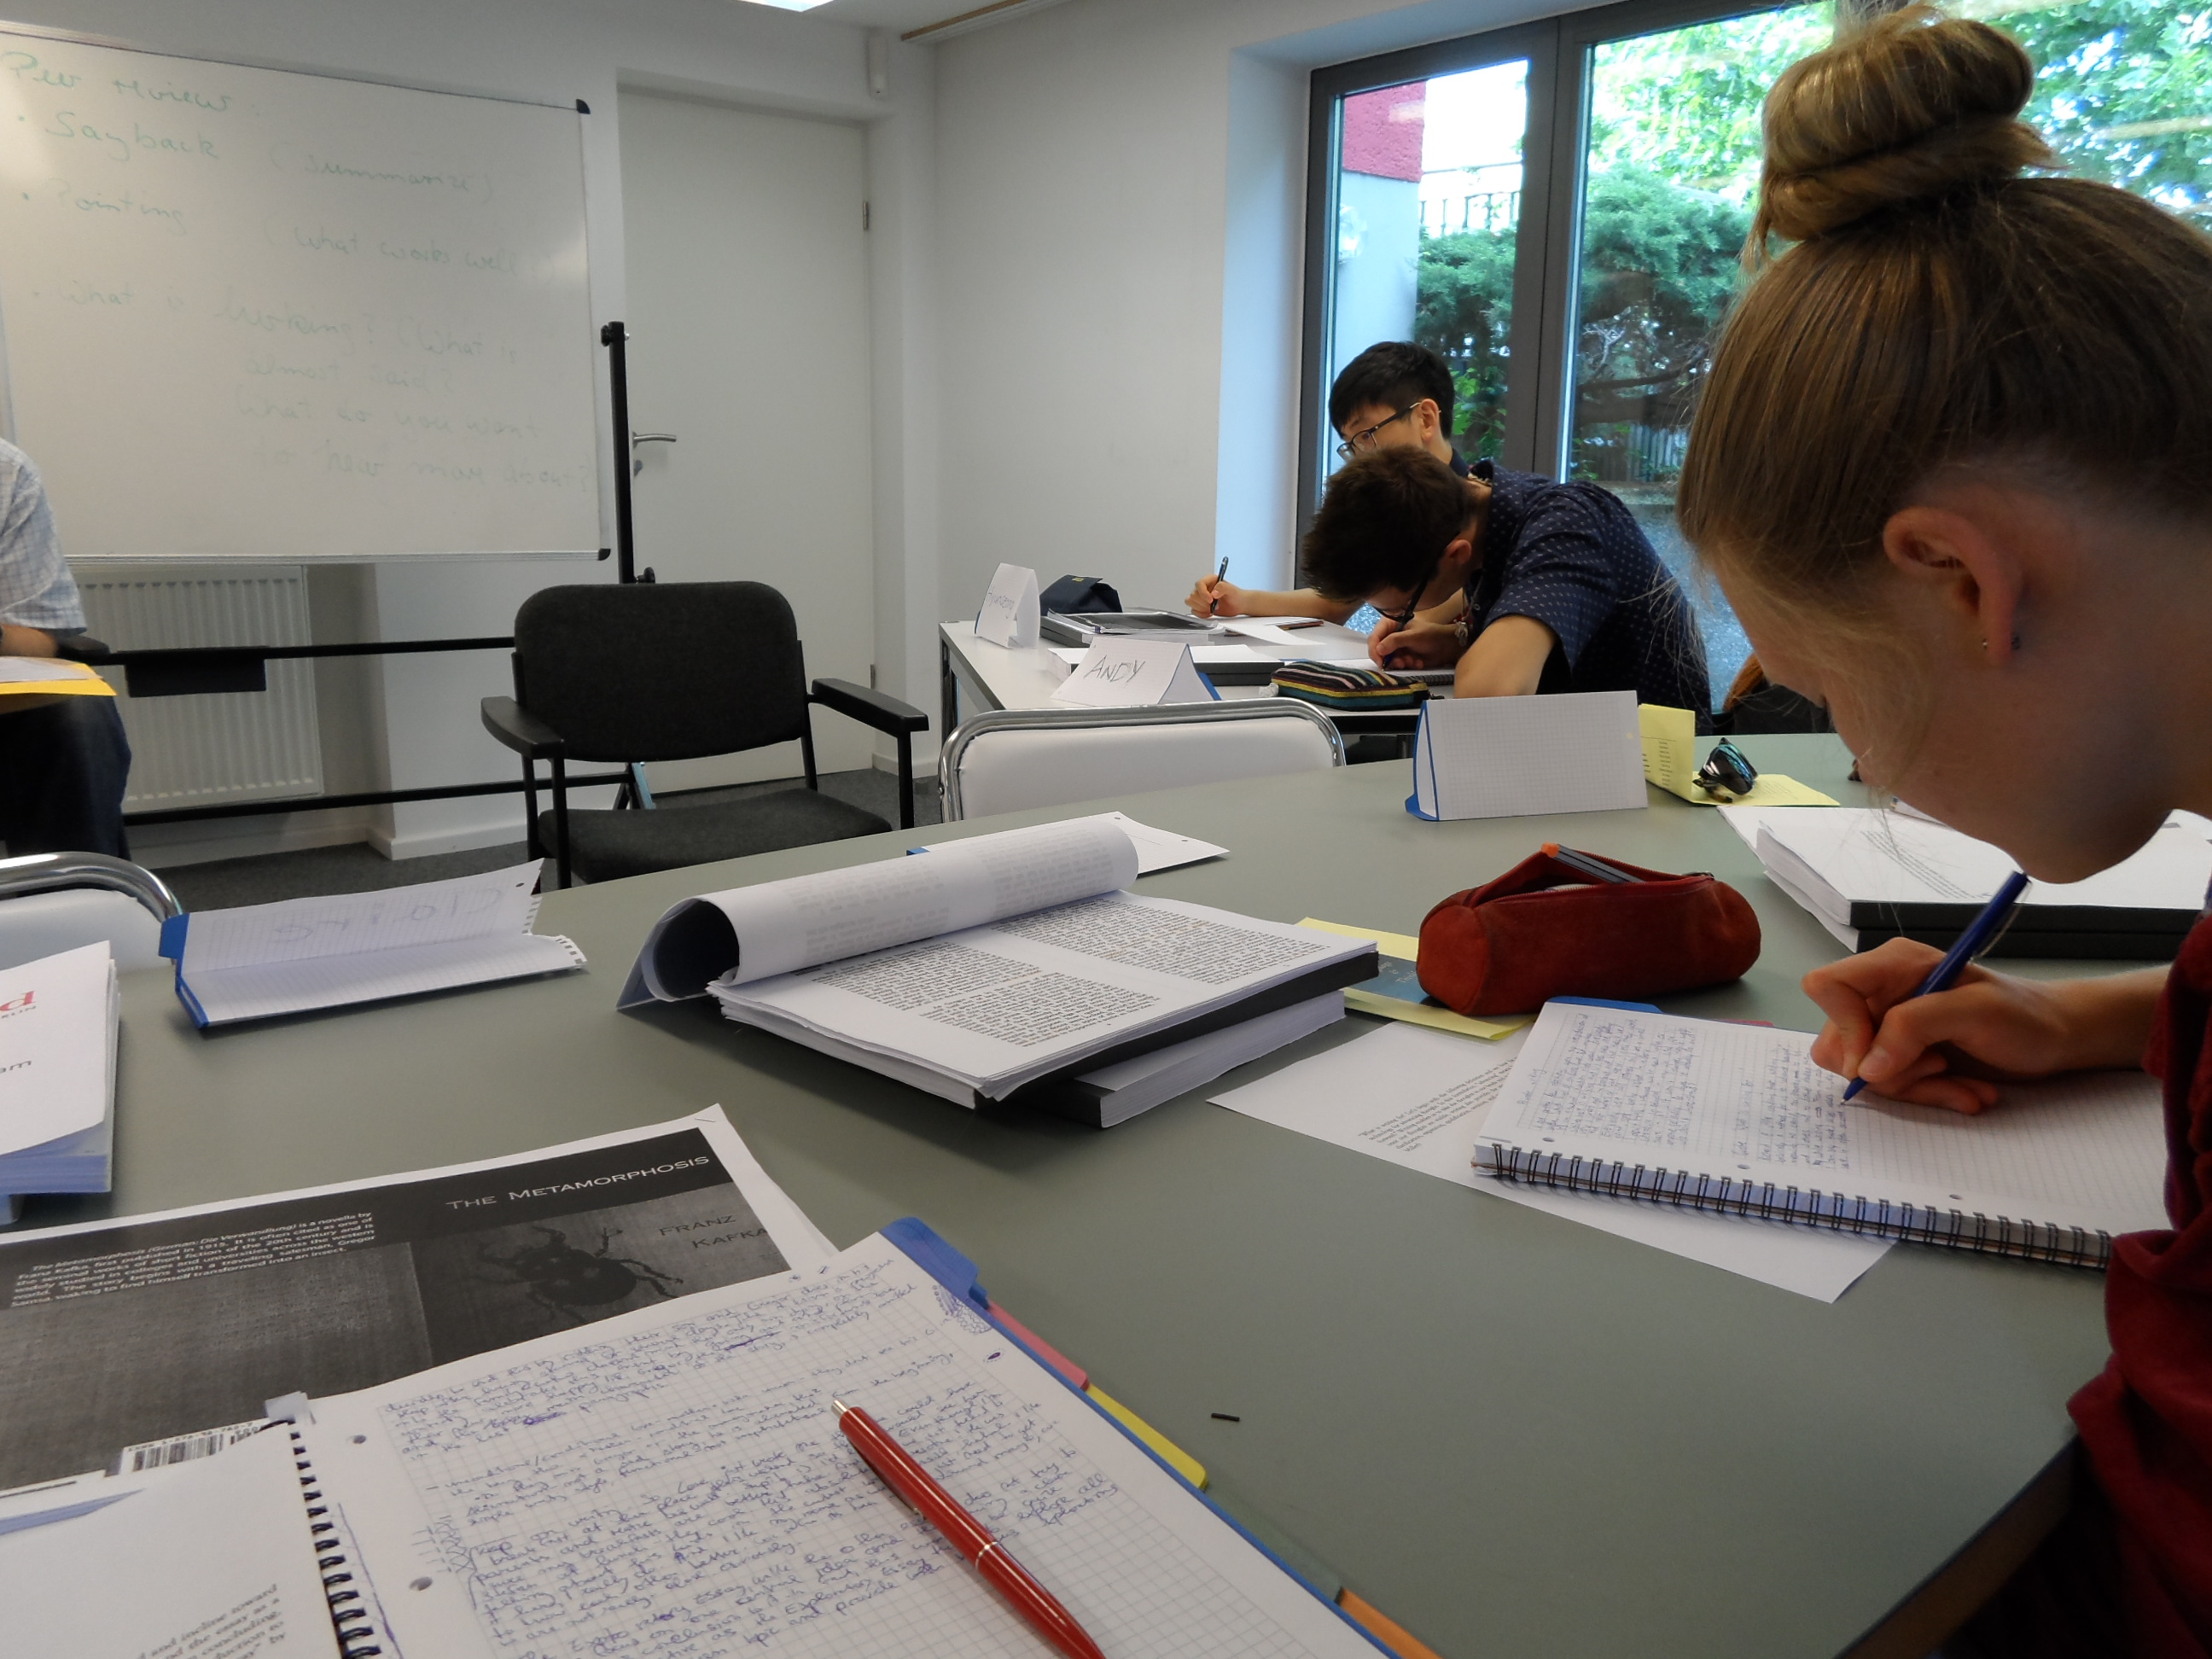 “Free writing” at Bard College Berlin’s L&T